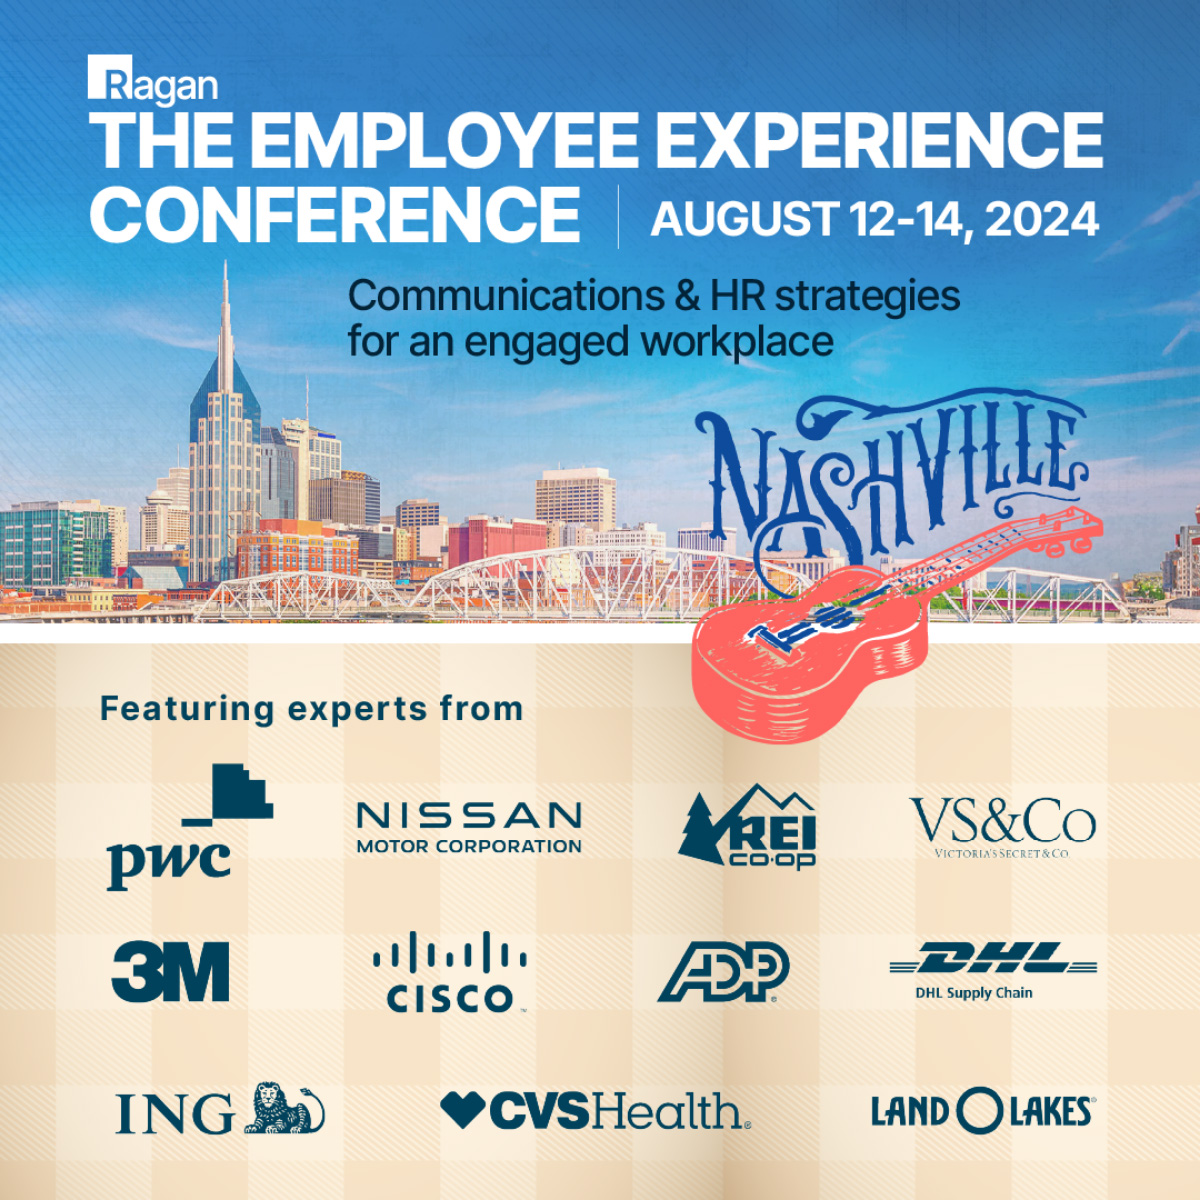 Ragan | Employee Experience Conference | August 12-14, 2024